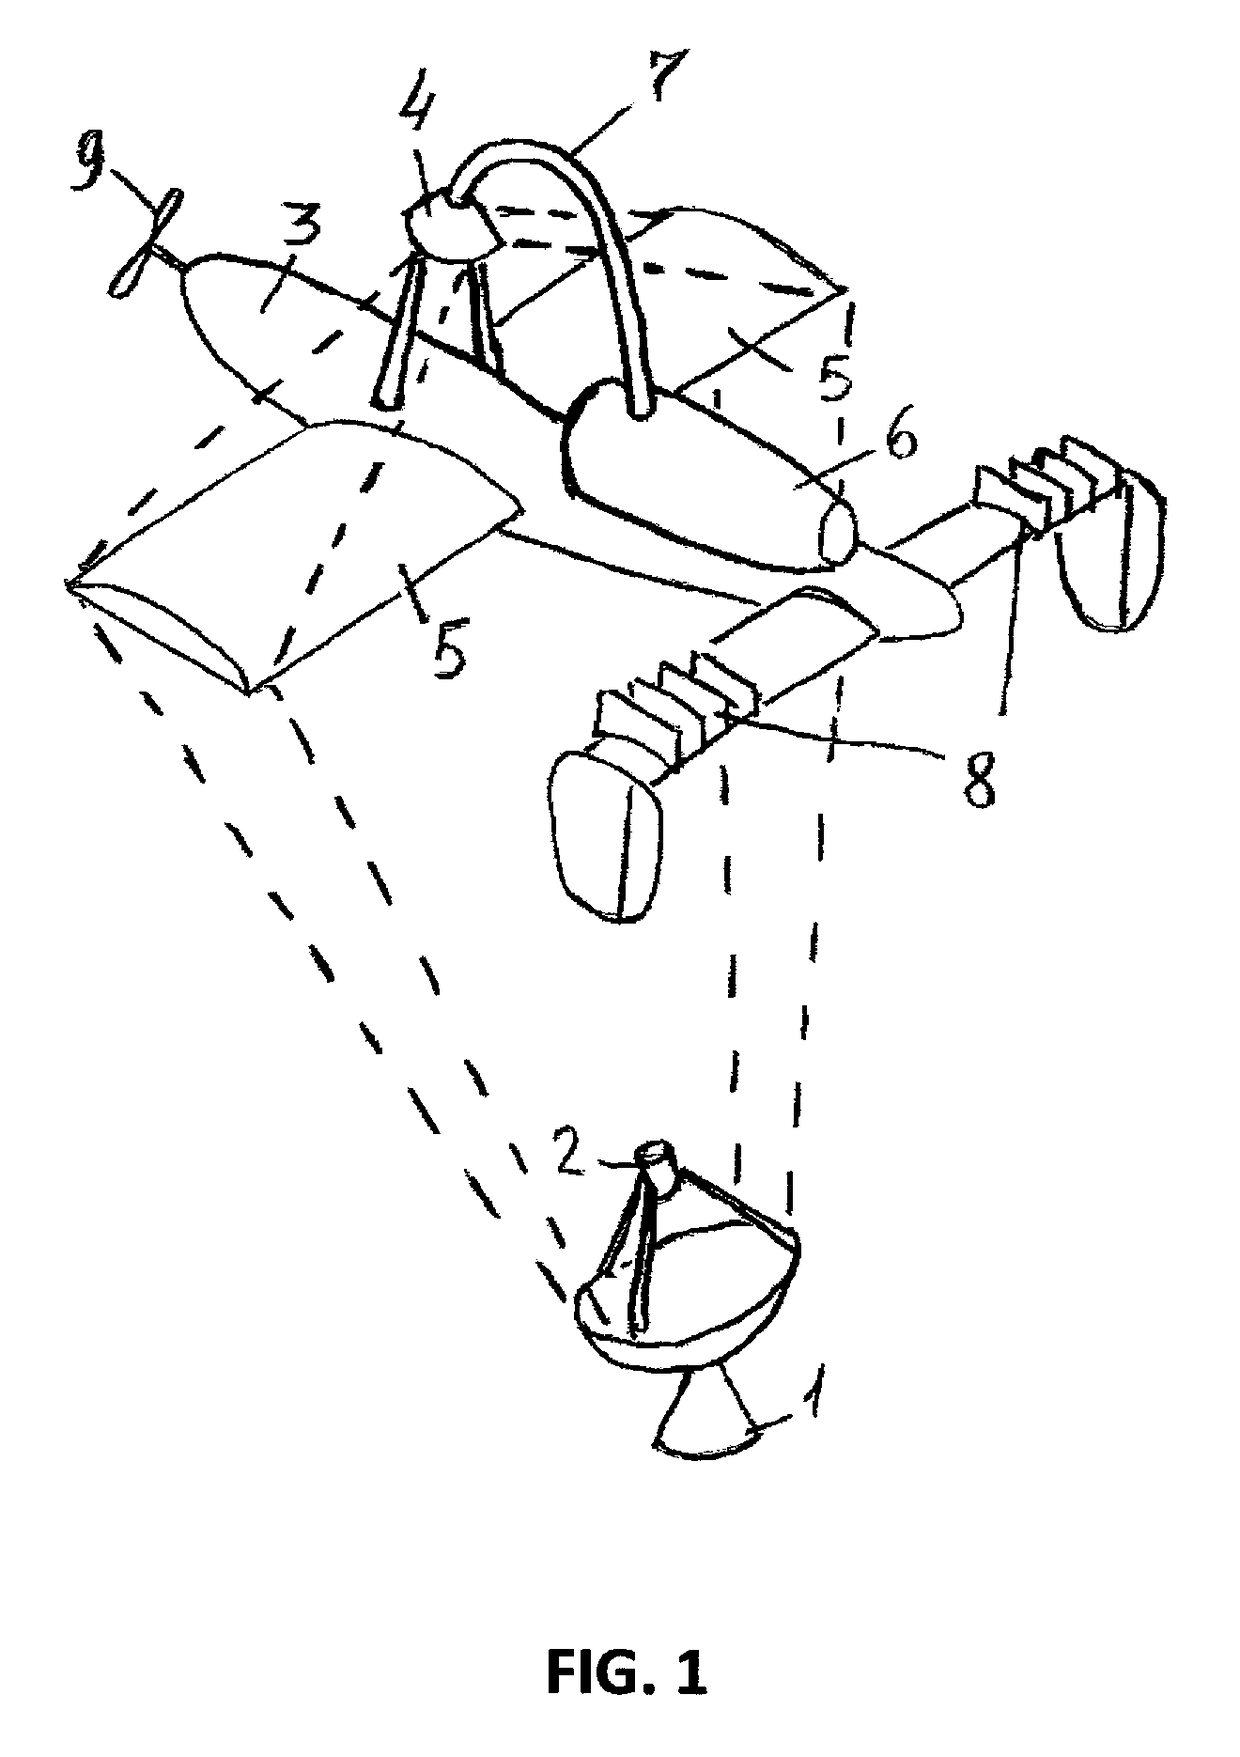 Methods of laser powering unmanned aerial vehicles with heat engines